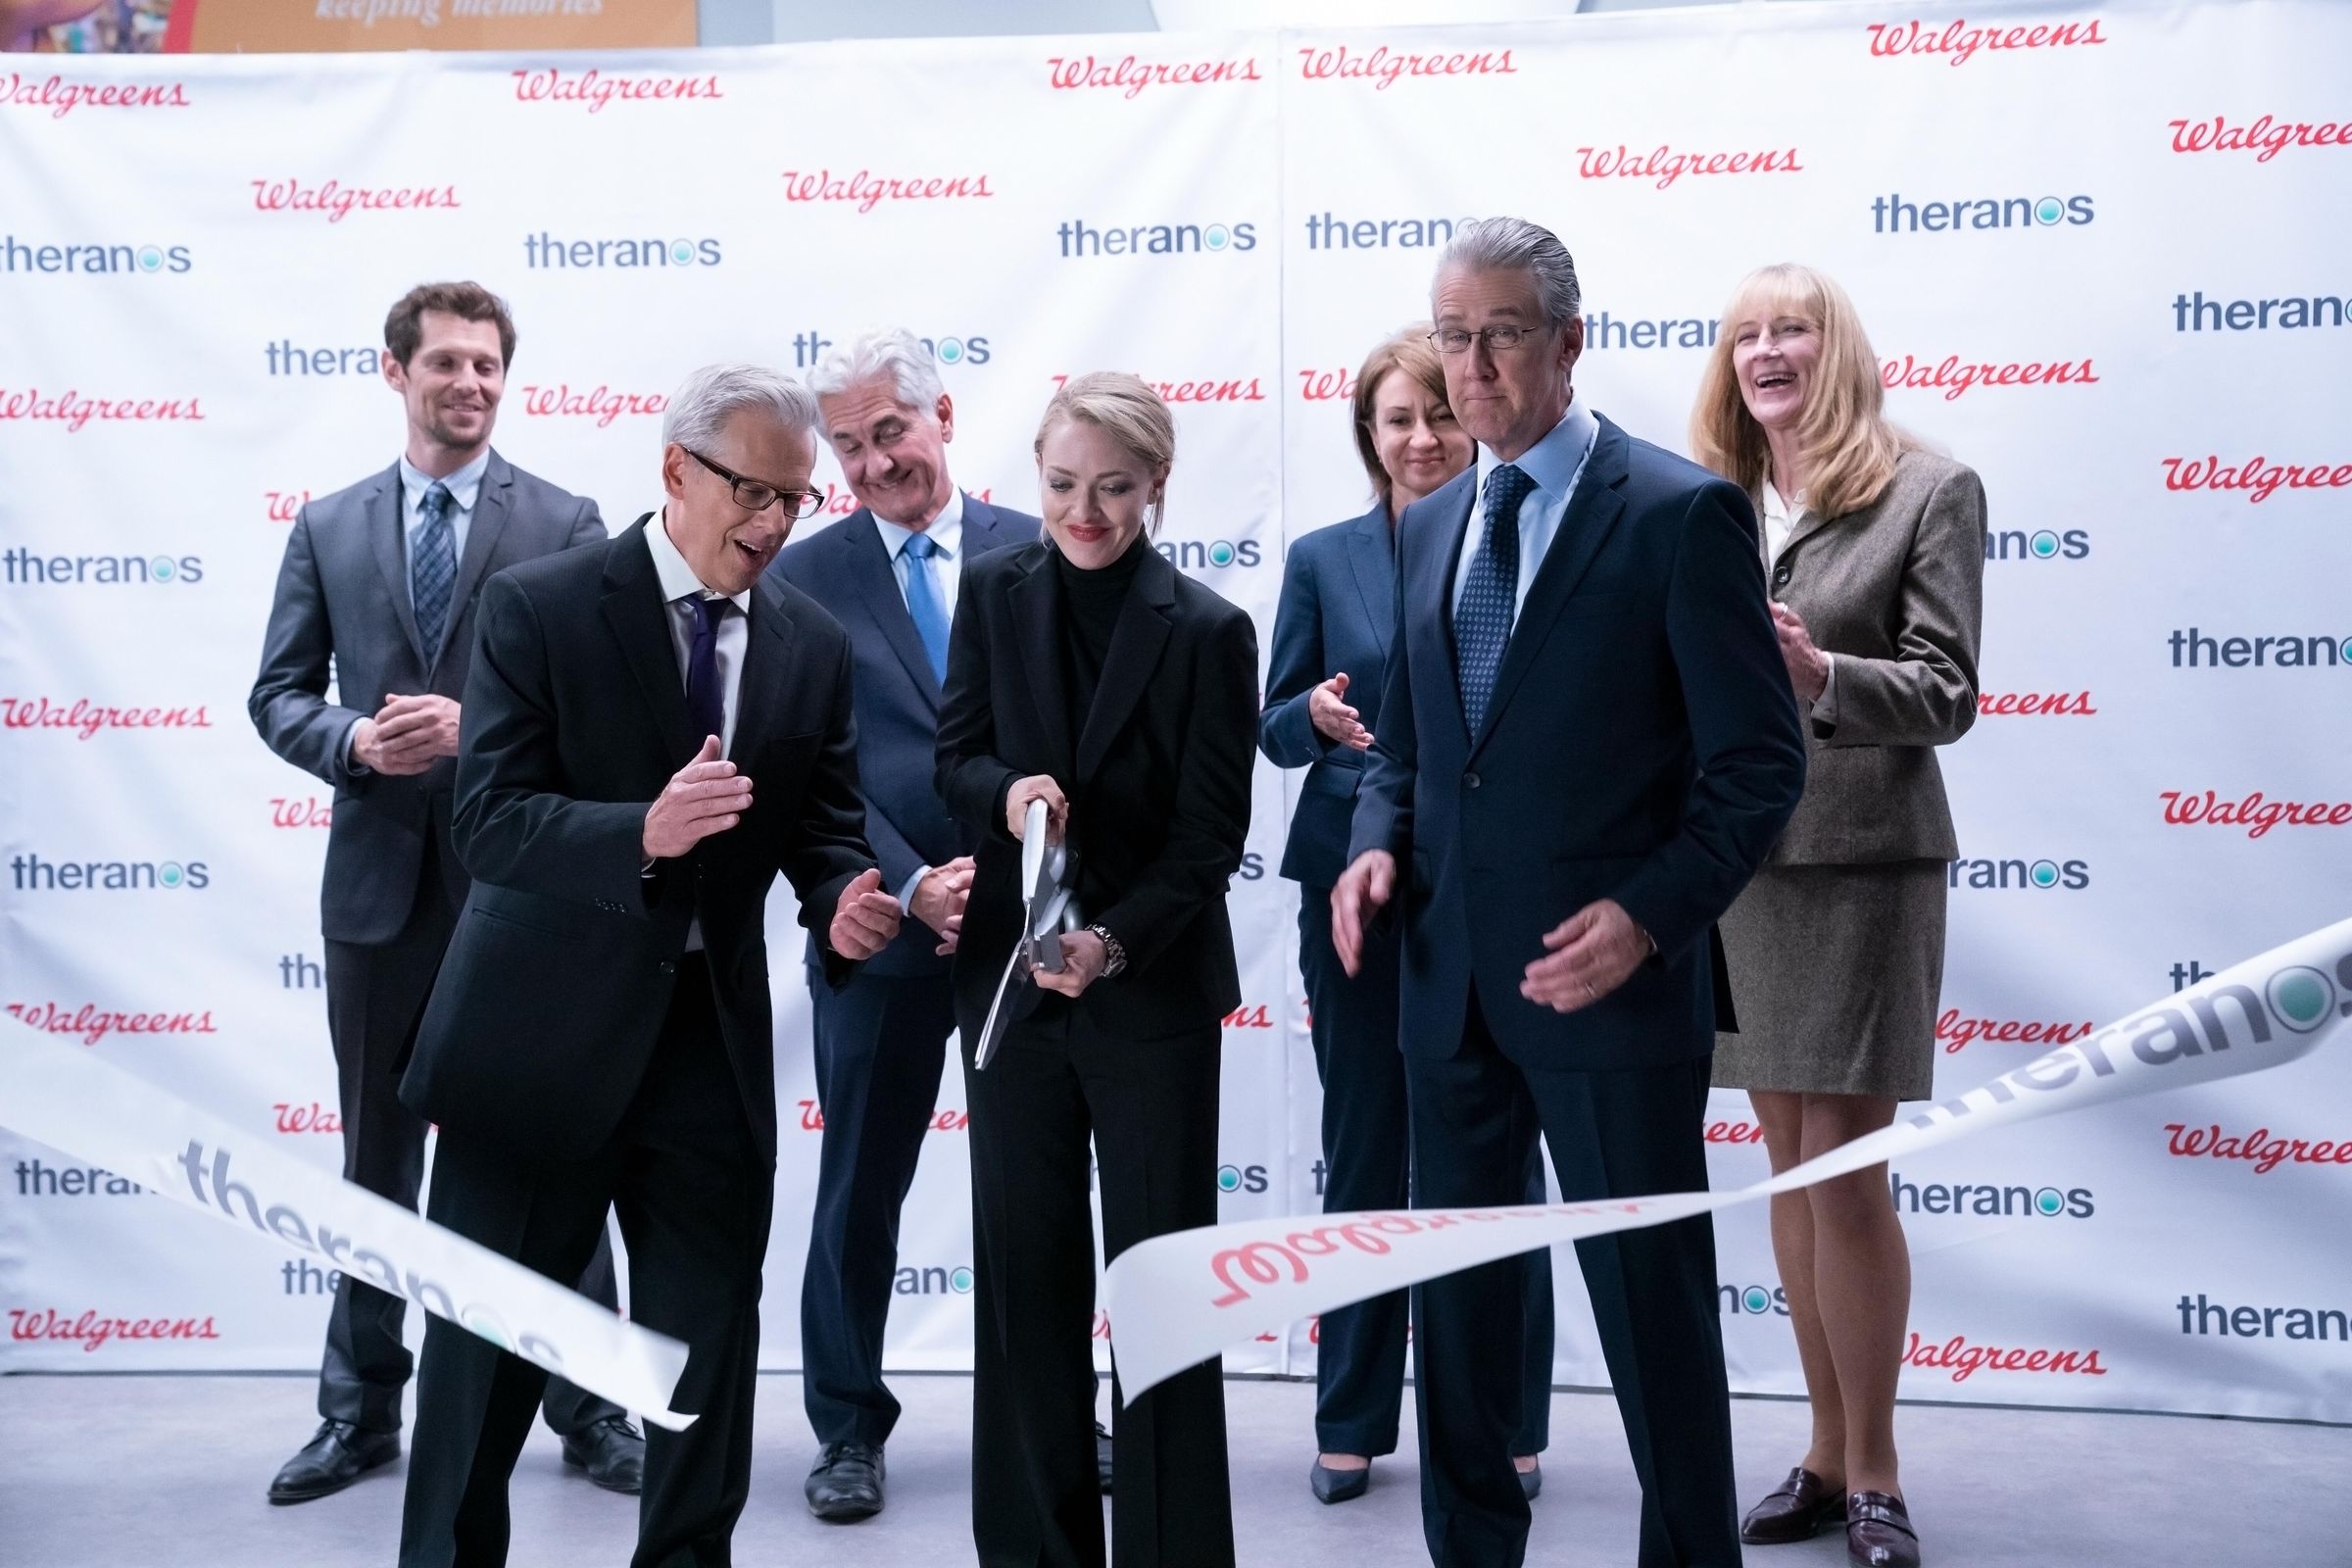 Holmes attending a ribbon cutting ceremony with her new Walgreens partners.